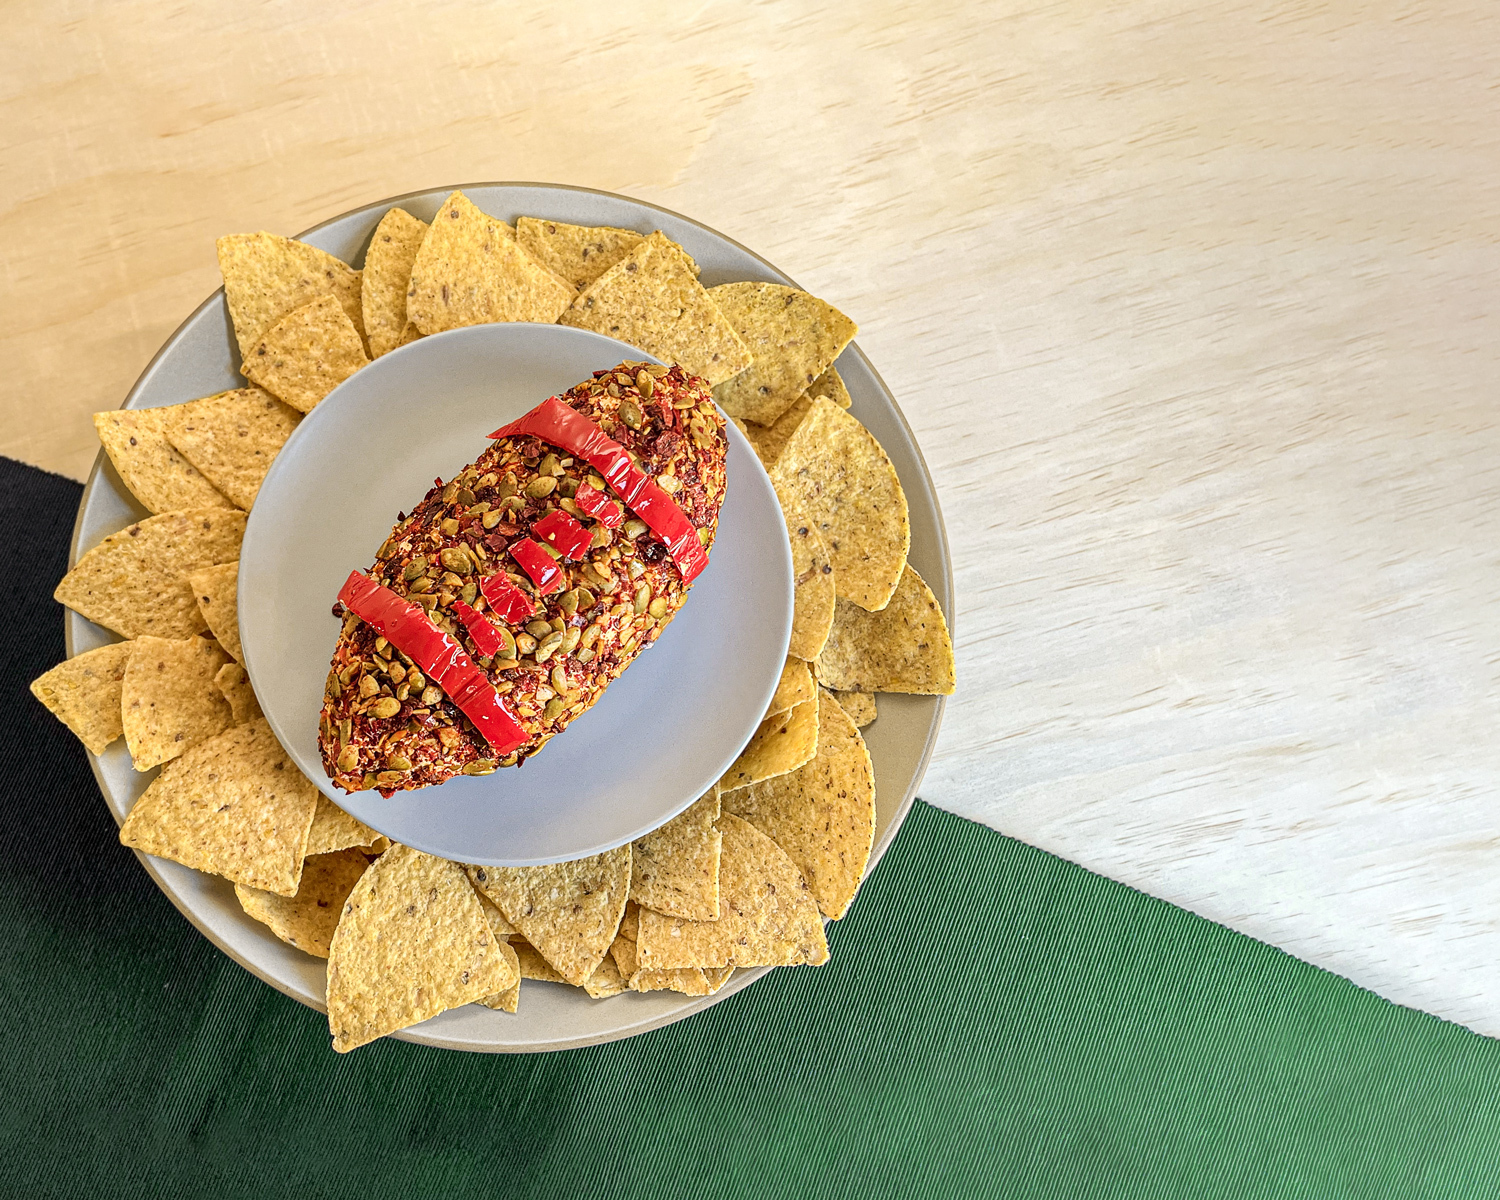 Football-shaped cheese ball on a platter with tortilla chips